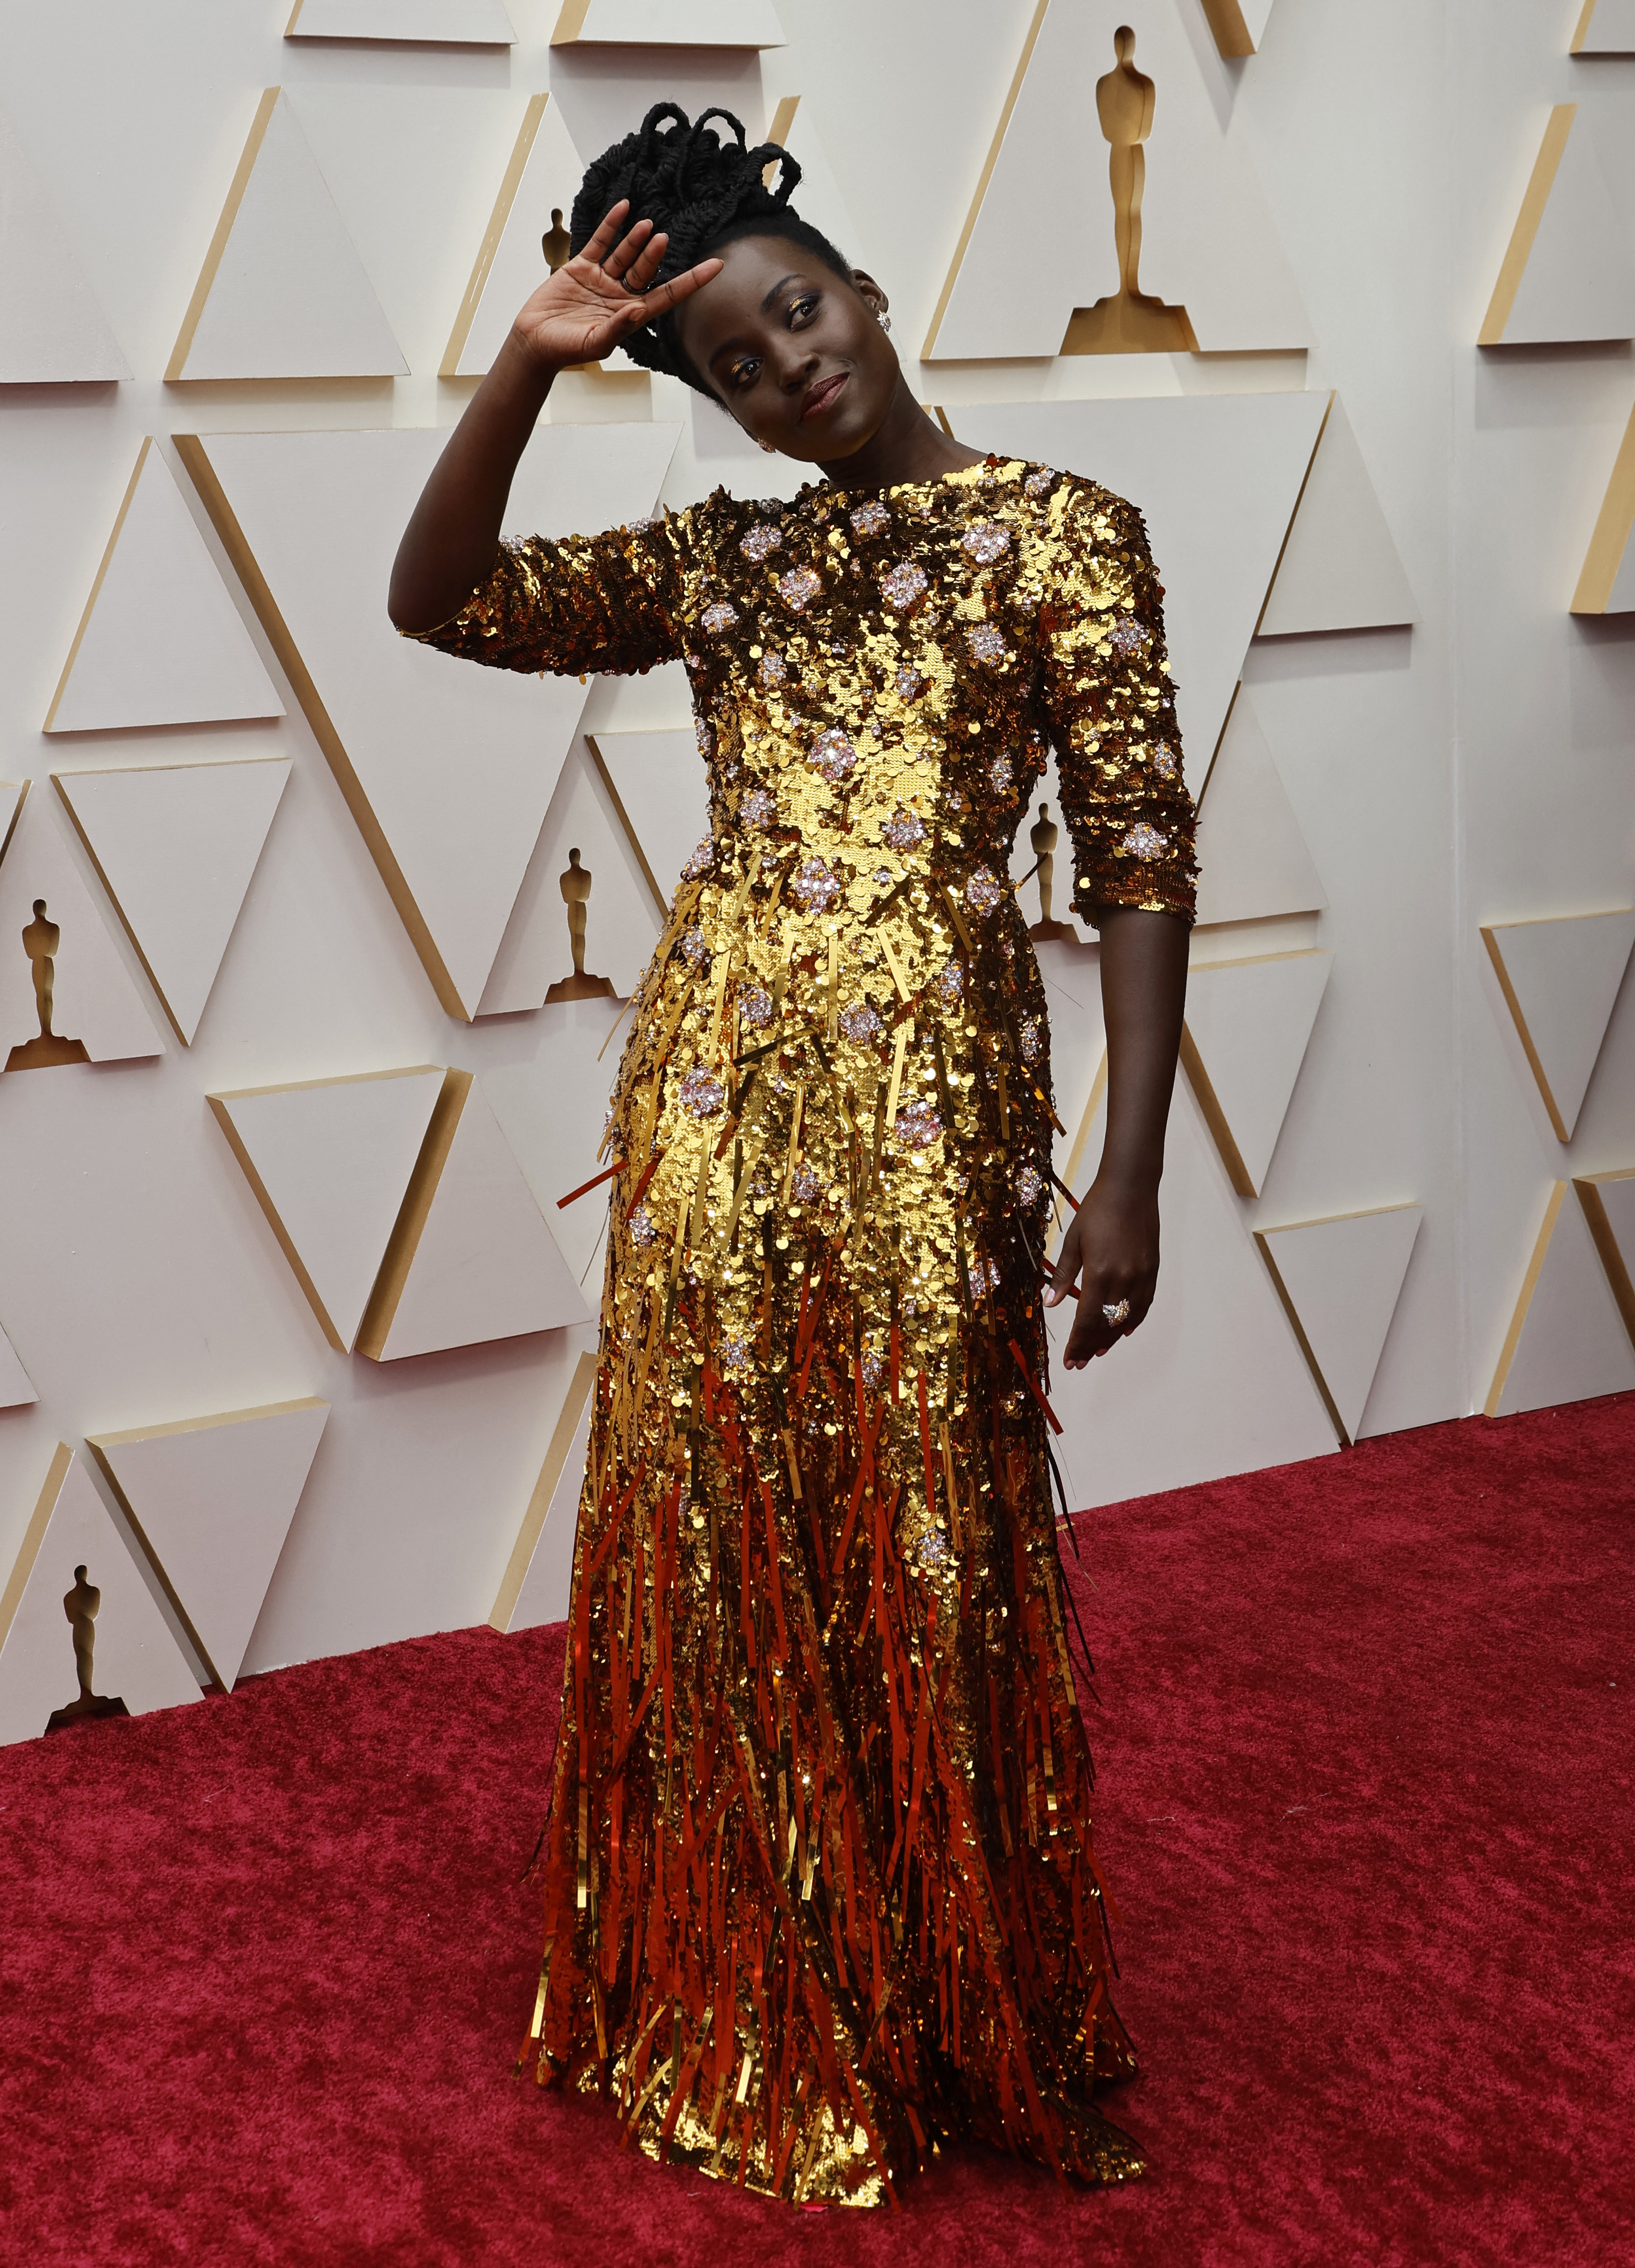 lupita nyong'o poses with her hand to her head on the oscars red carpet wearing a metallic-gold tasselled gown